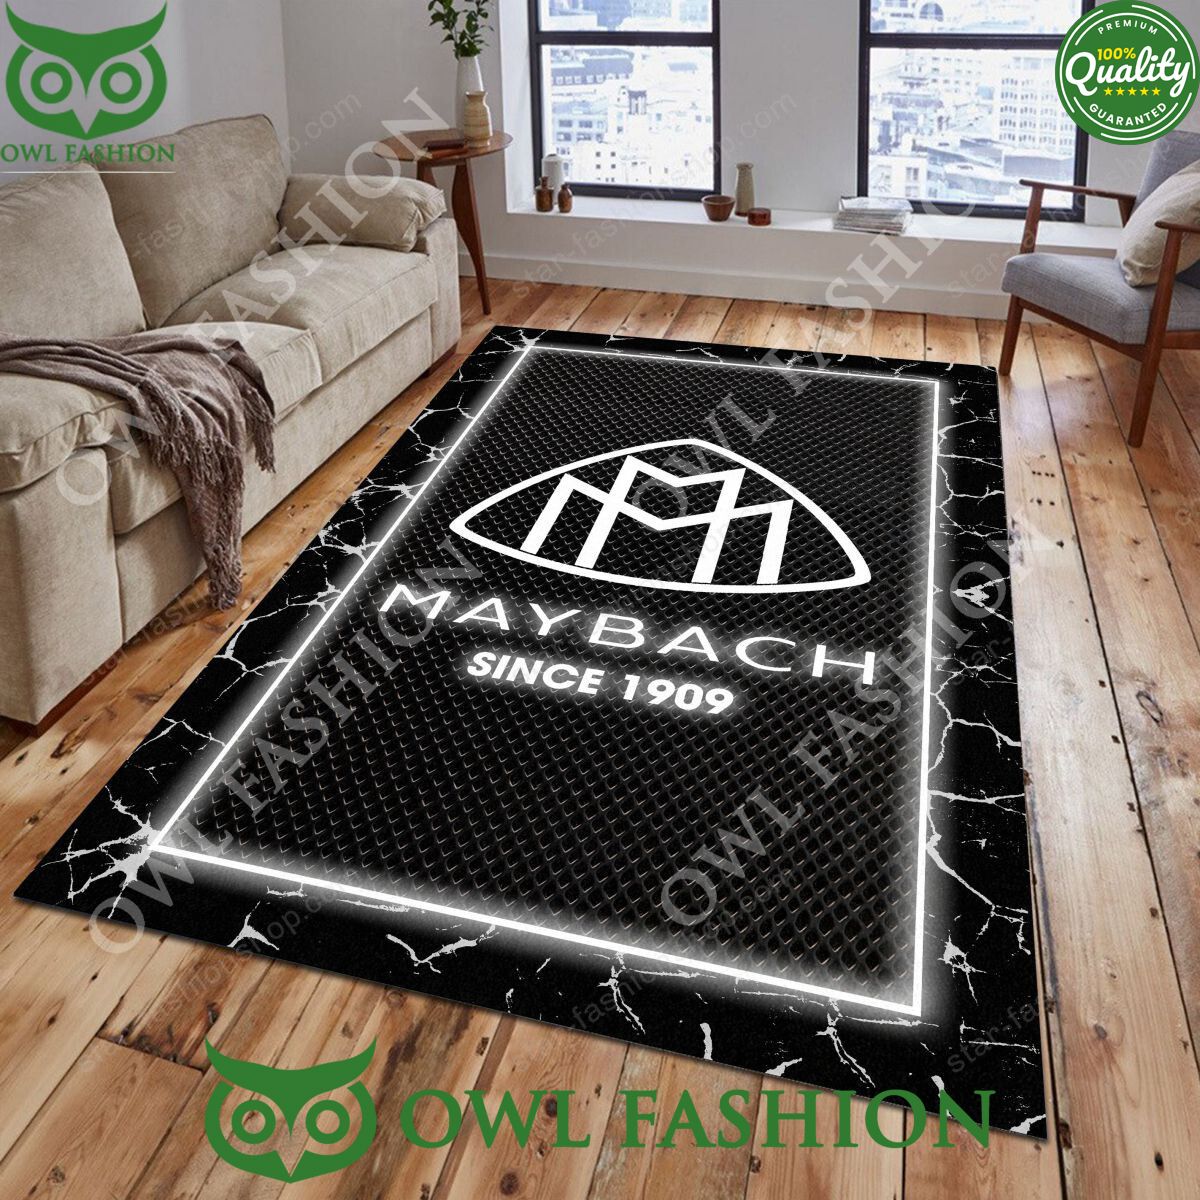 Home Living Room Maybach Lighting Rug Carpet You look so healthy and fit